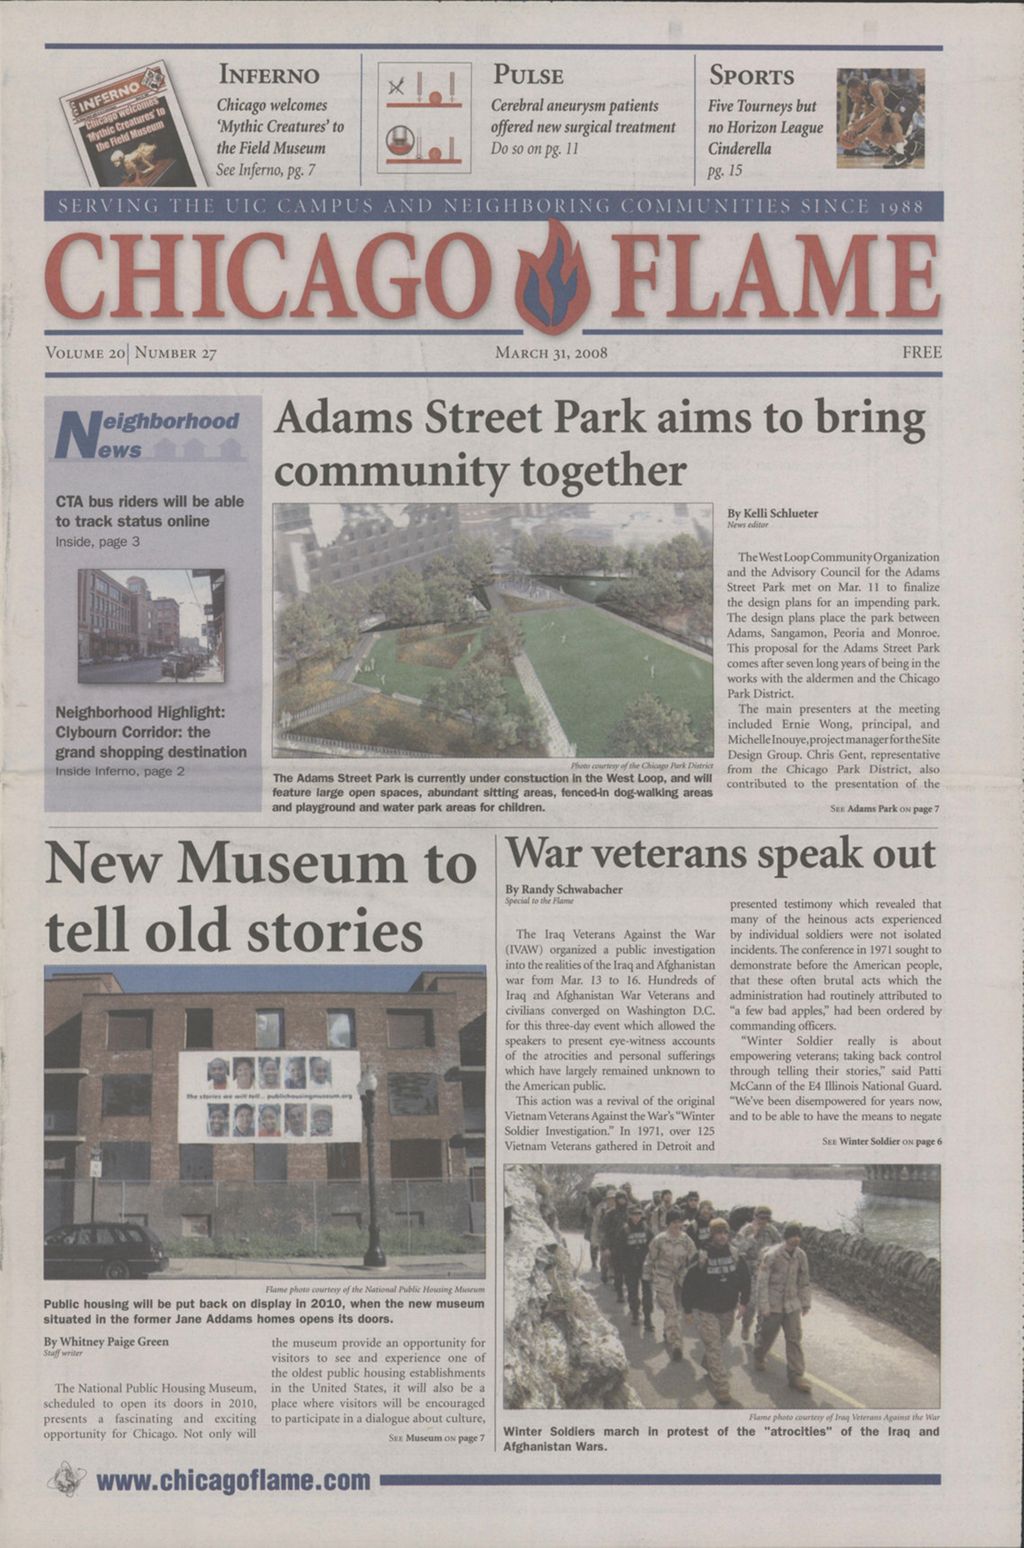 Chicago Flame (March 31, 2008)